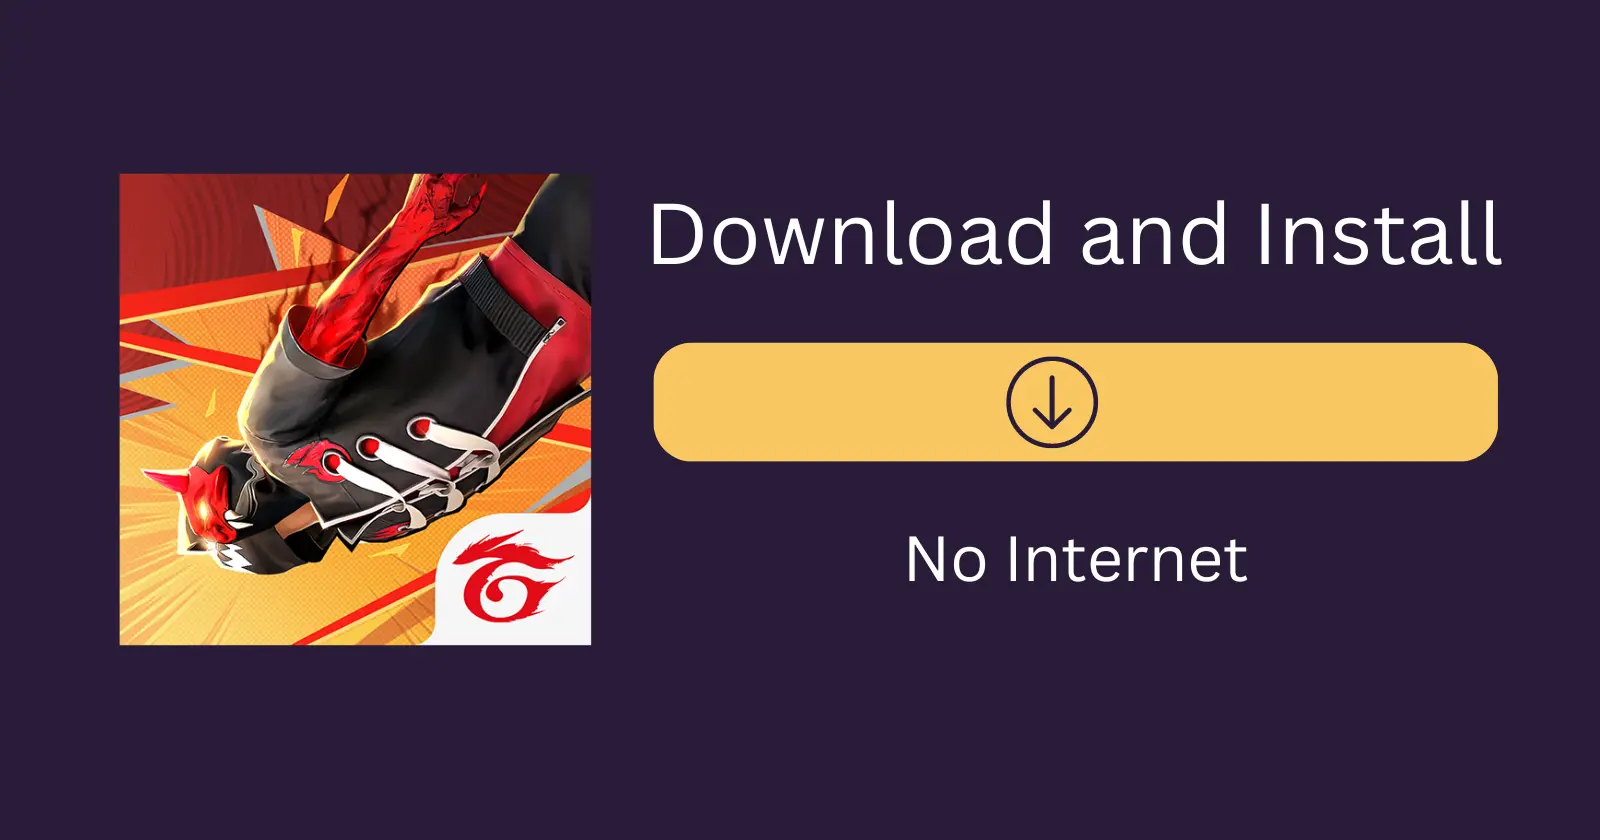 free fire latest version apk logo “Download and Install” text, and a yellow button on a purple background.